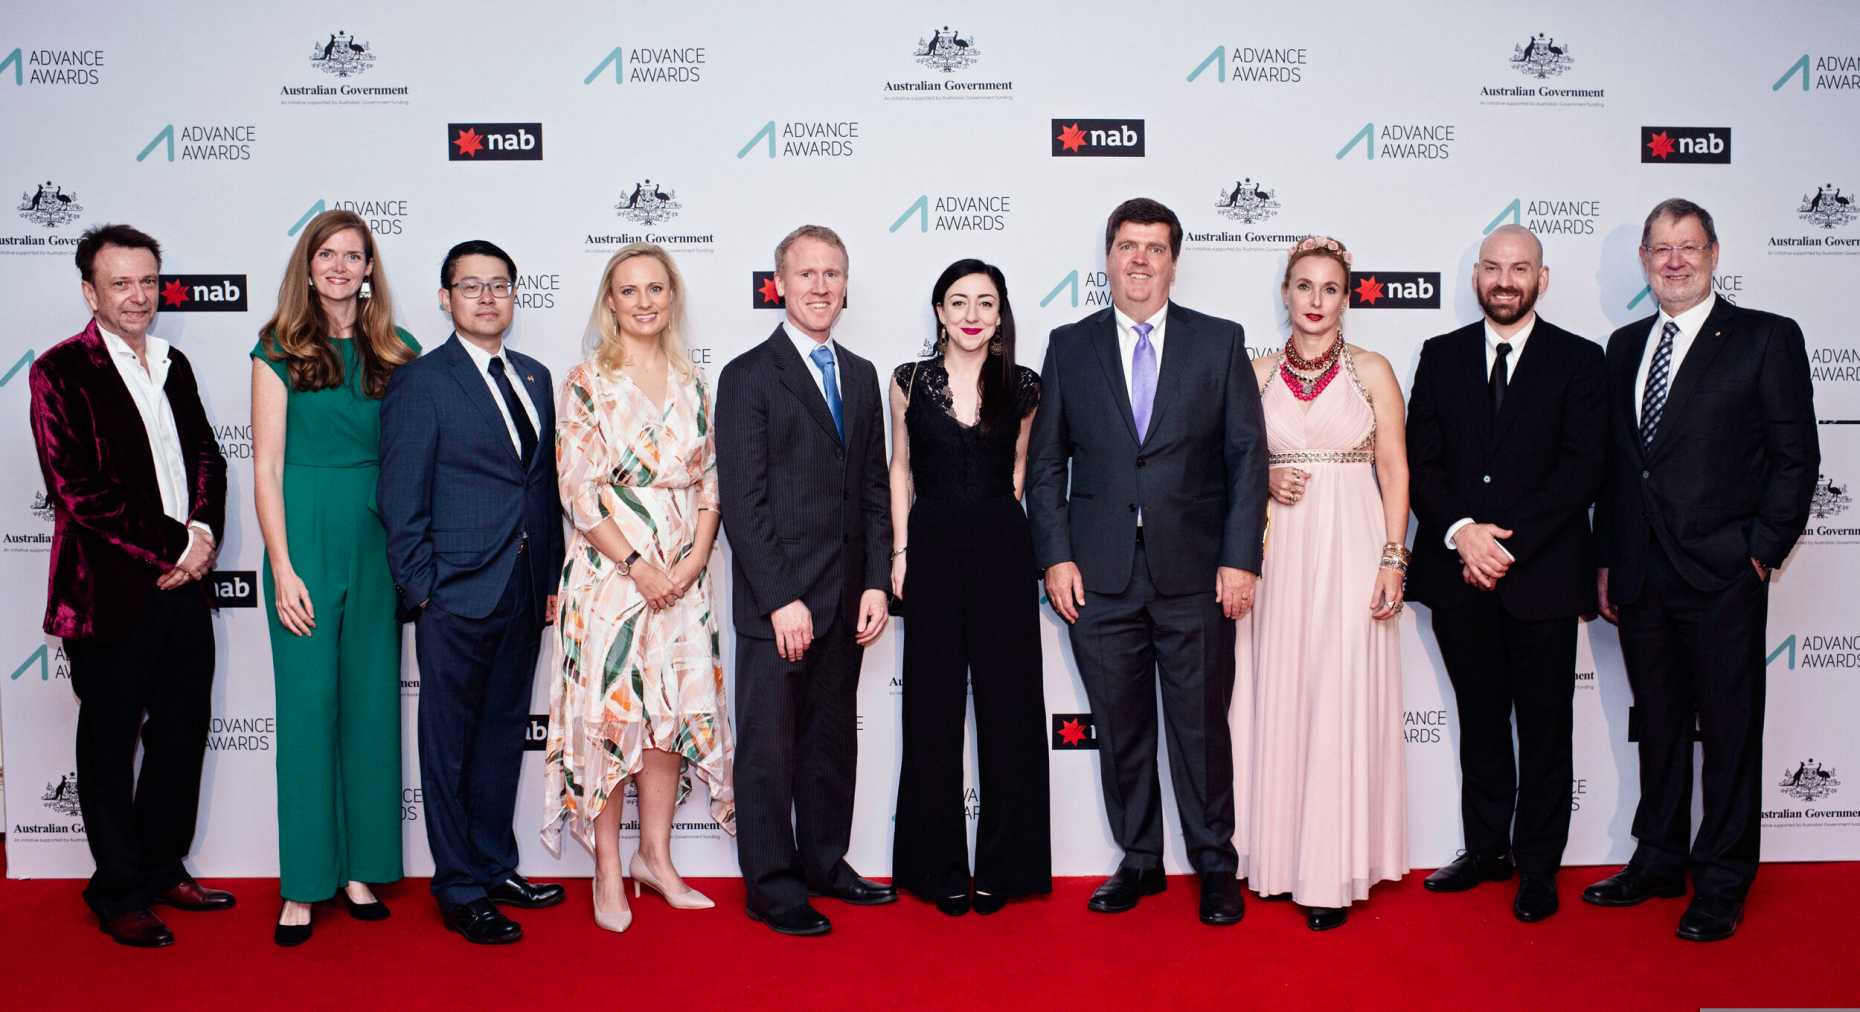 2019 Advance Award winners present at the Ceremony & Gala Dinner